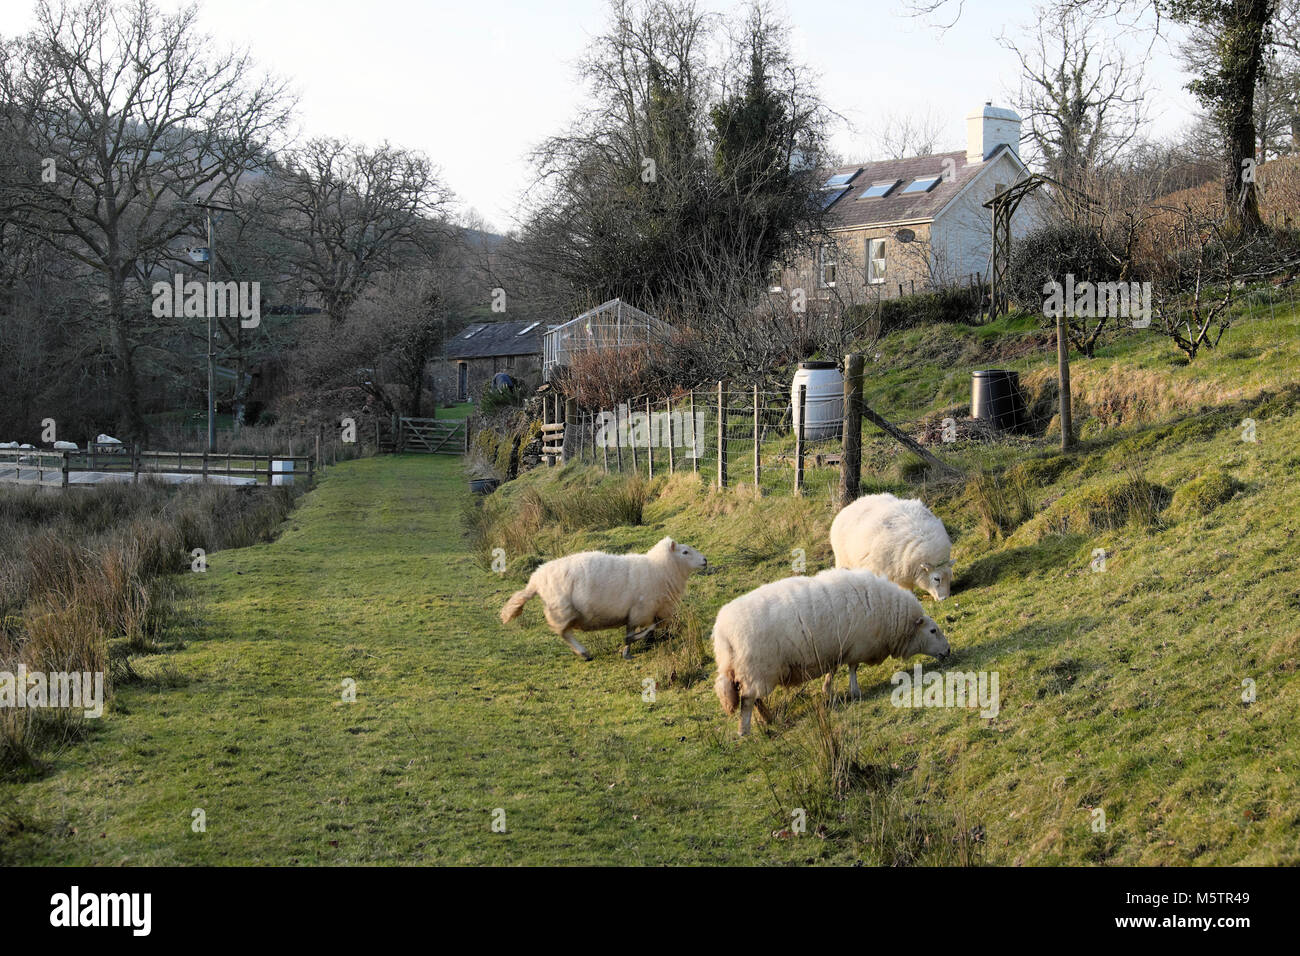 Sheep grazing in winter near a fenced off rural garden, house and greenhouse on a smallholding in the Carmarthenshire Wales UK  KATHY DEWITT Stock Photo